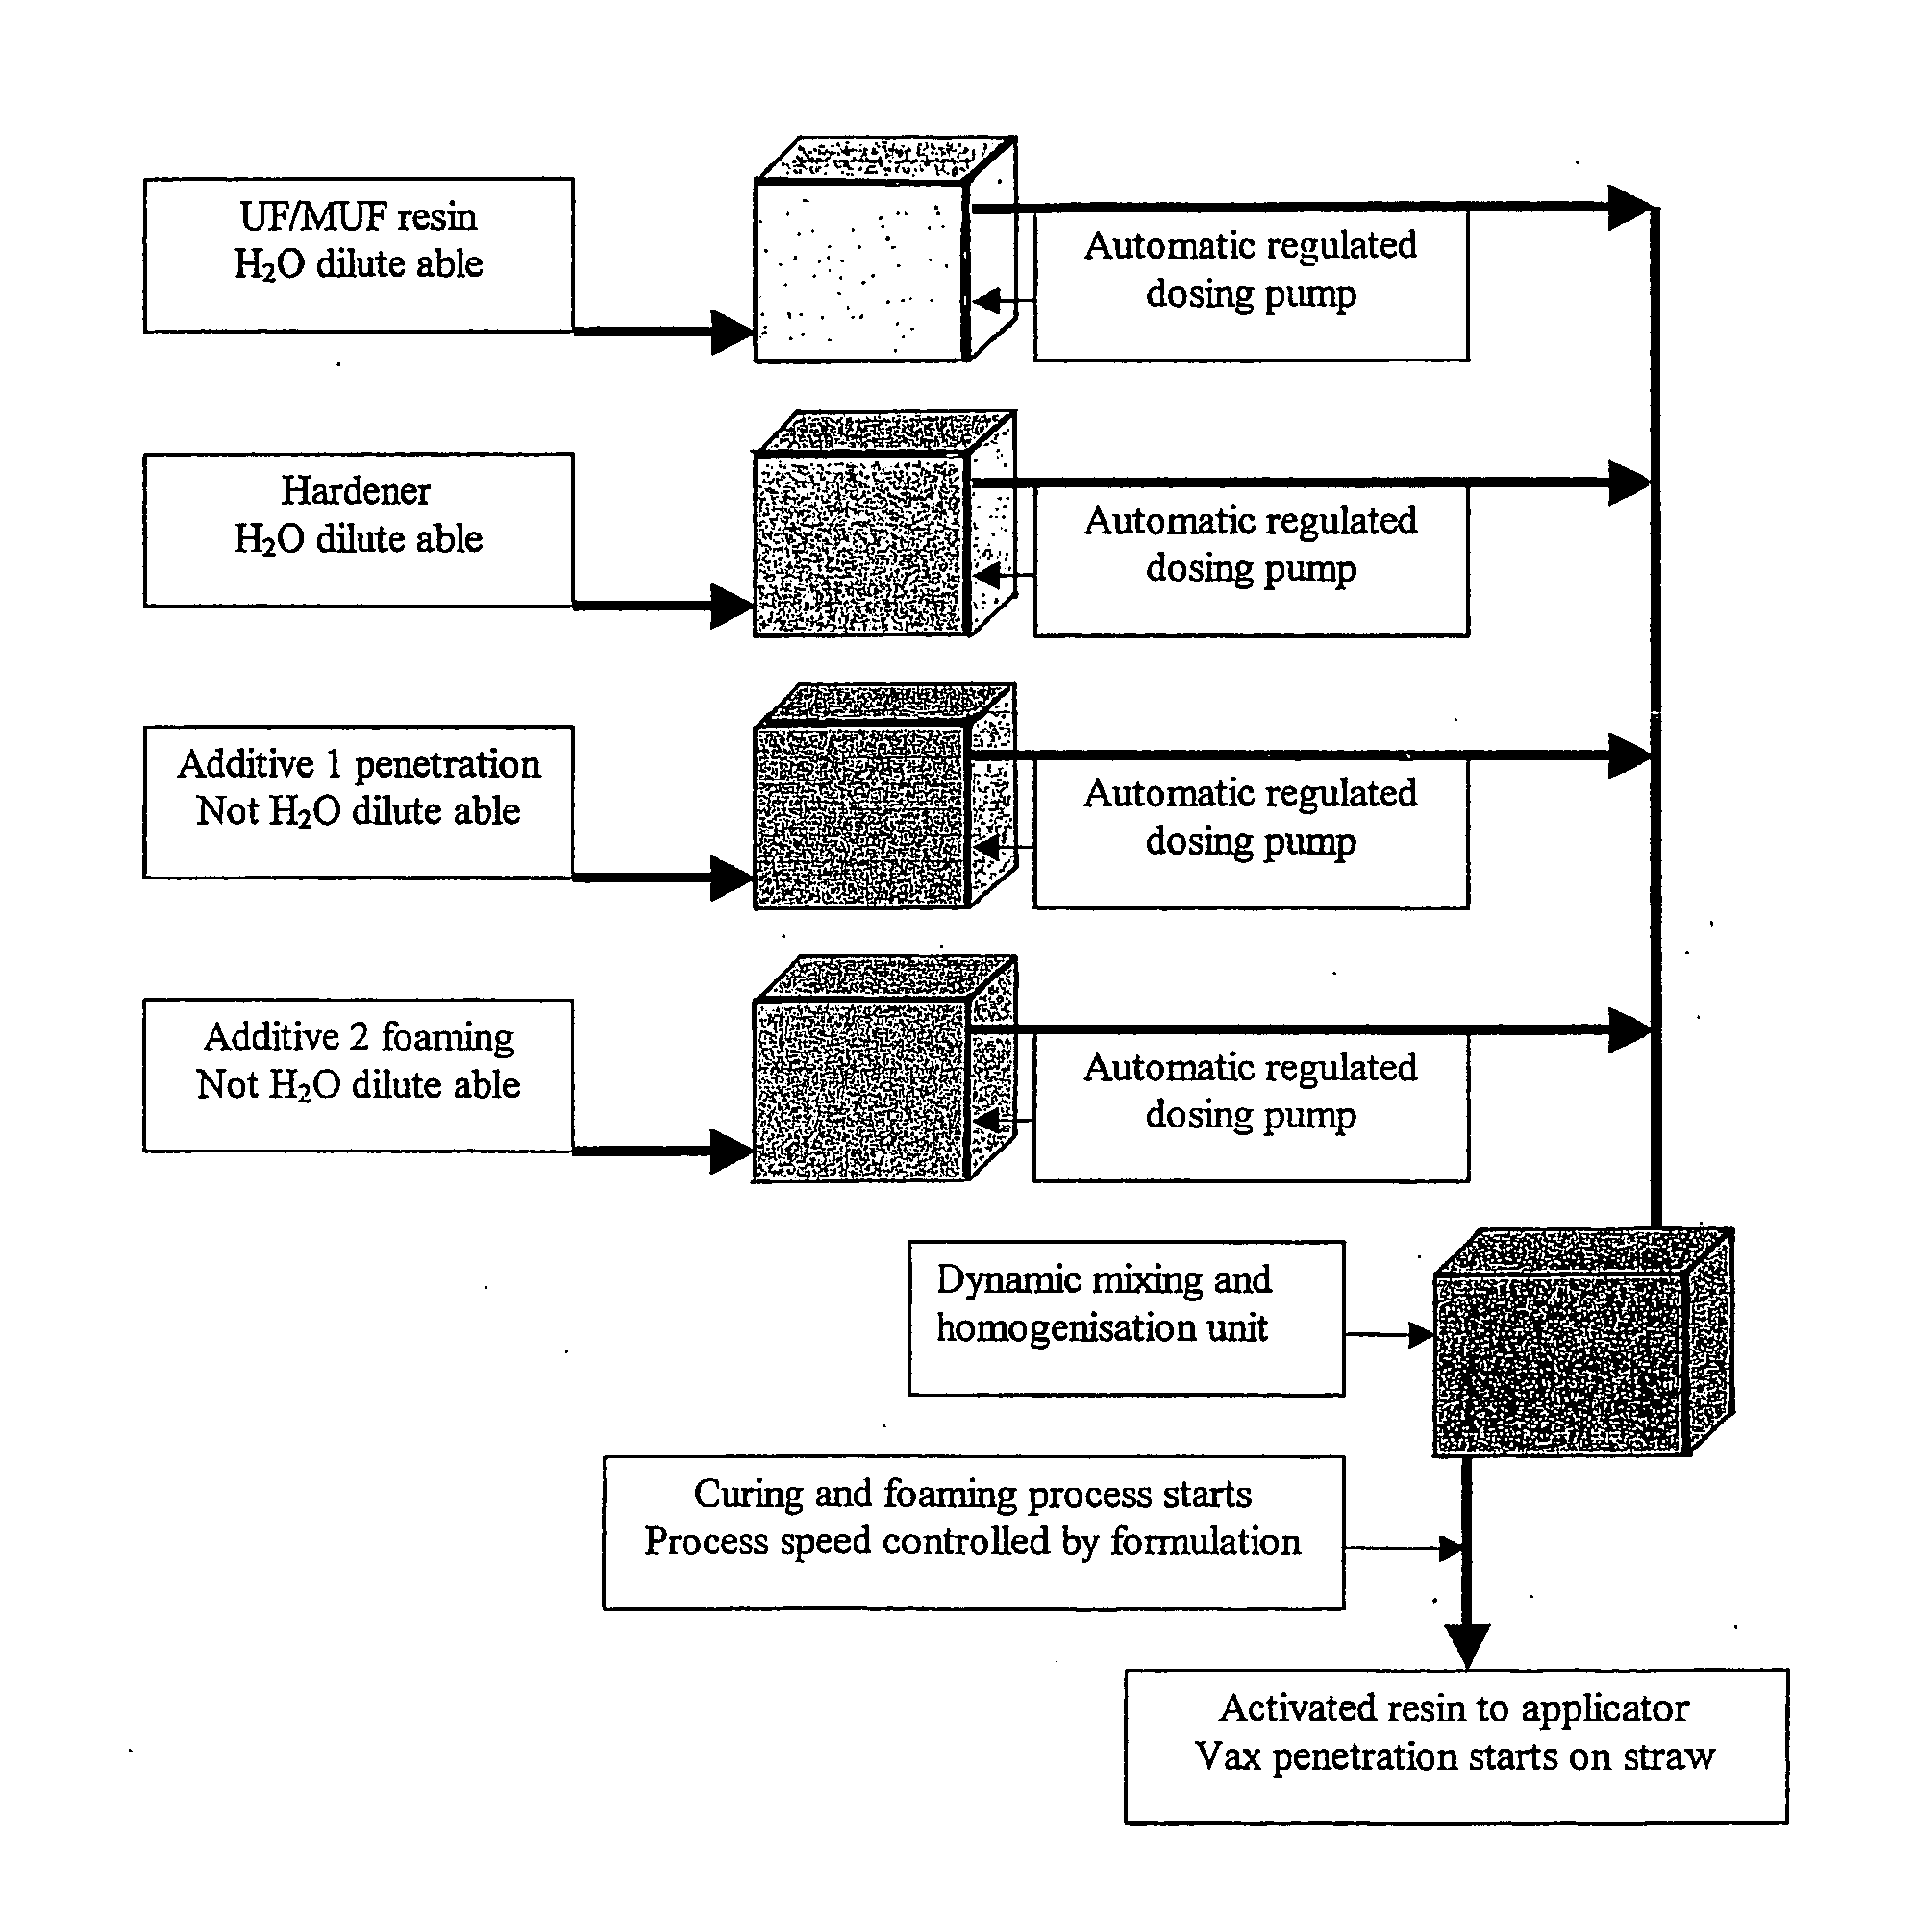 Method for Mixing and Homogenisation of Binding Agents and Additives